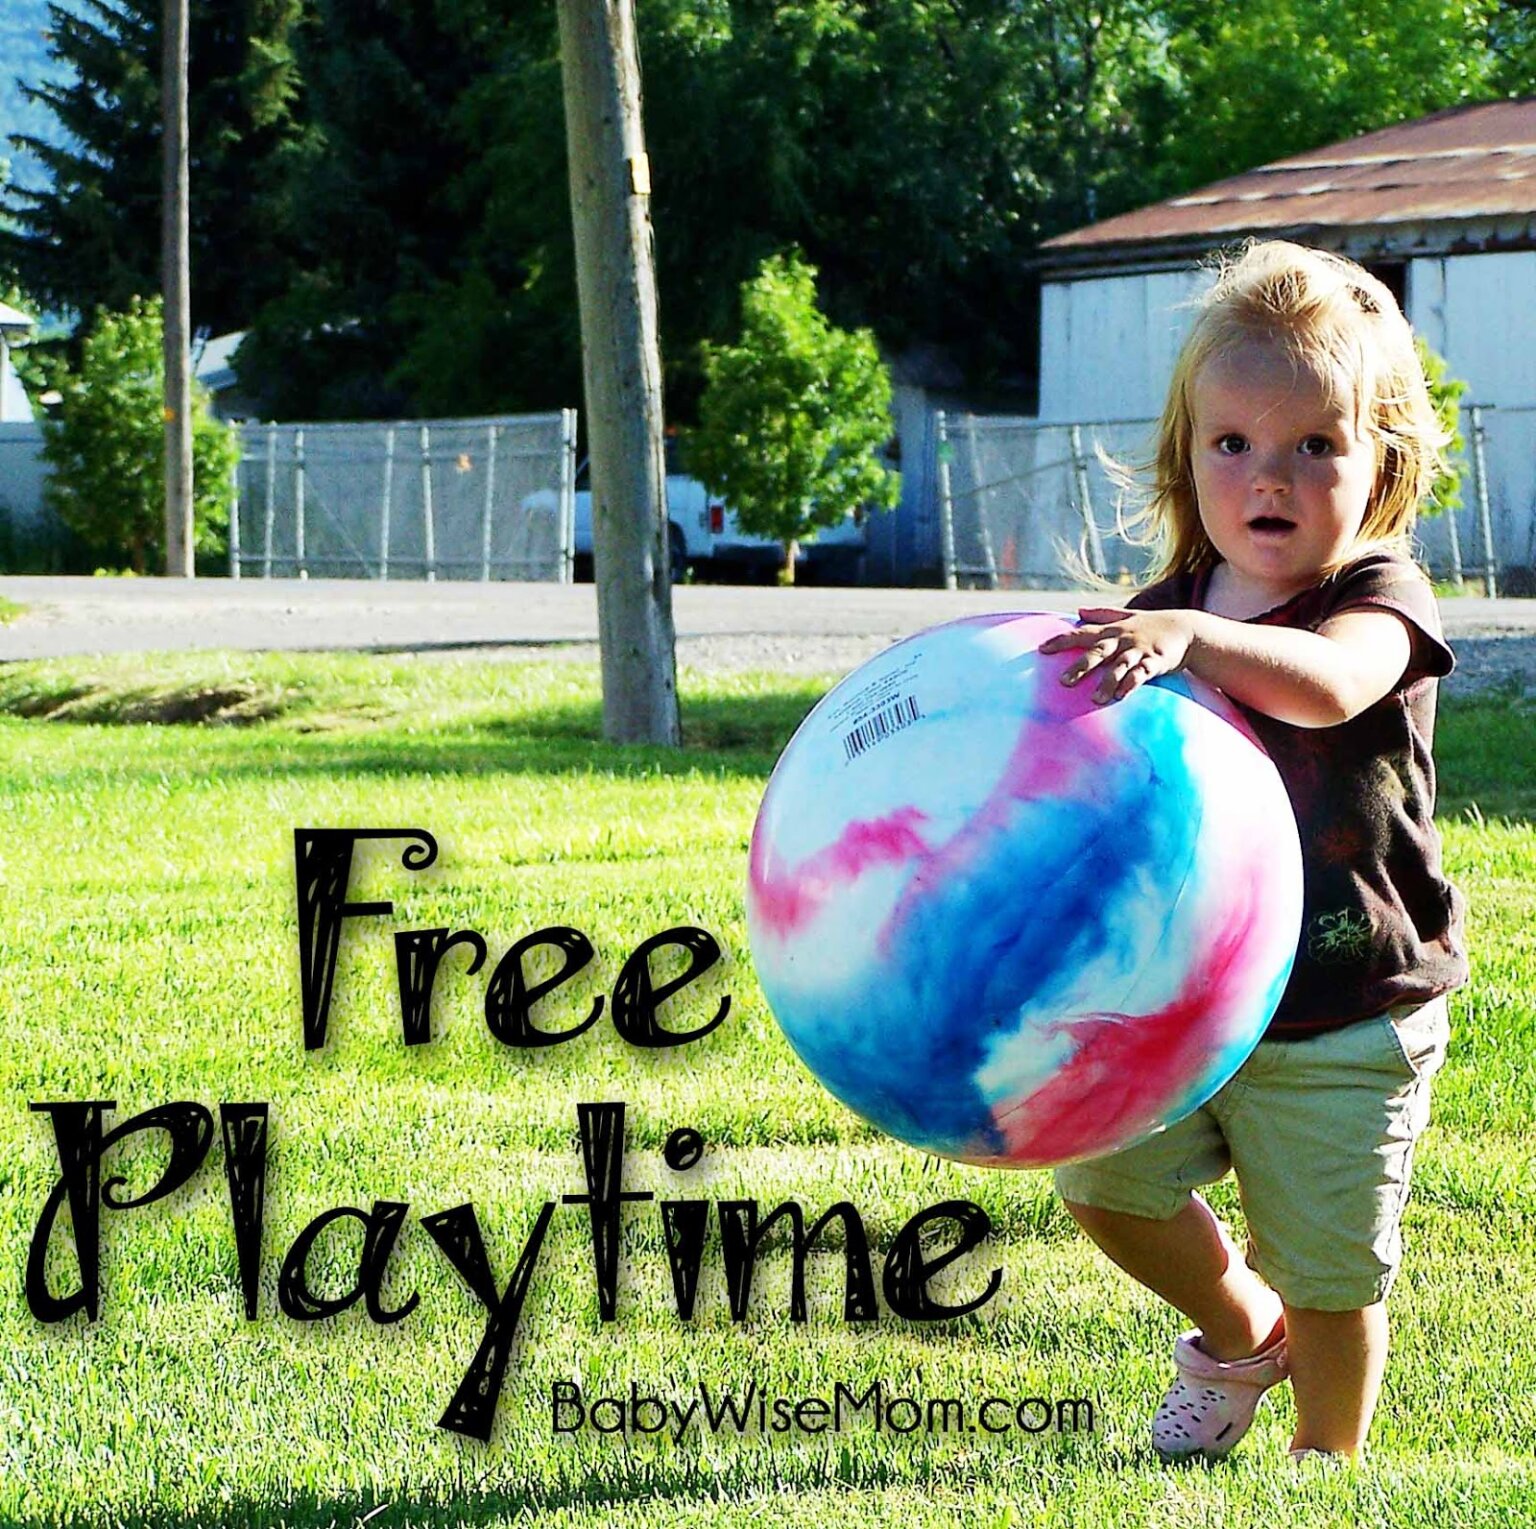 How To Use Free Playtime In Your Child's Schedule. What free playtime looks like by age and examples of how to use it in real life.